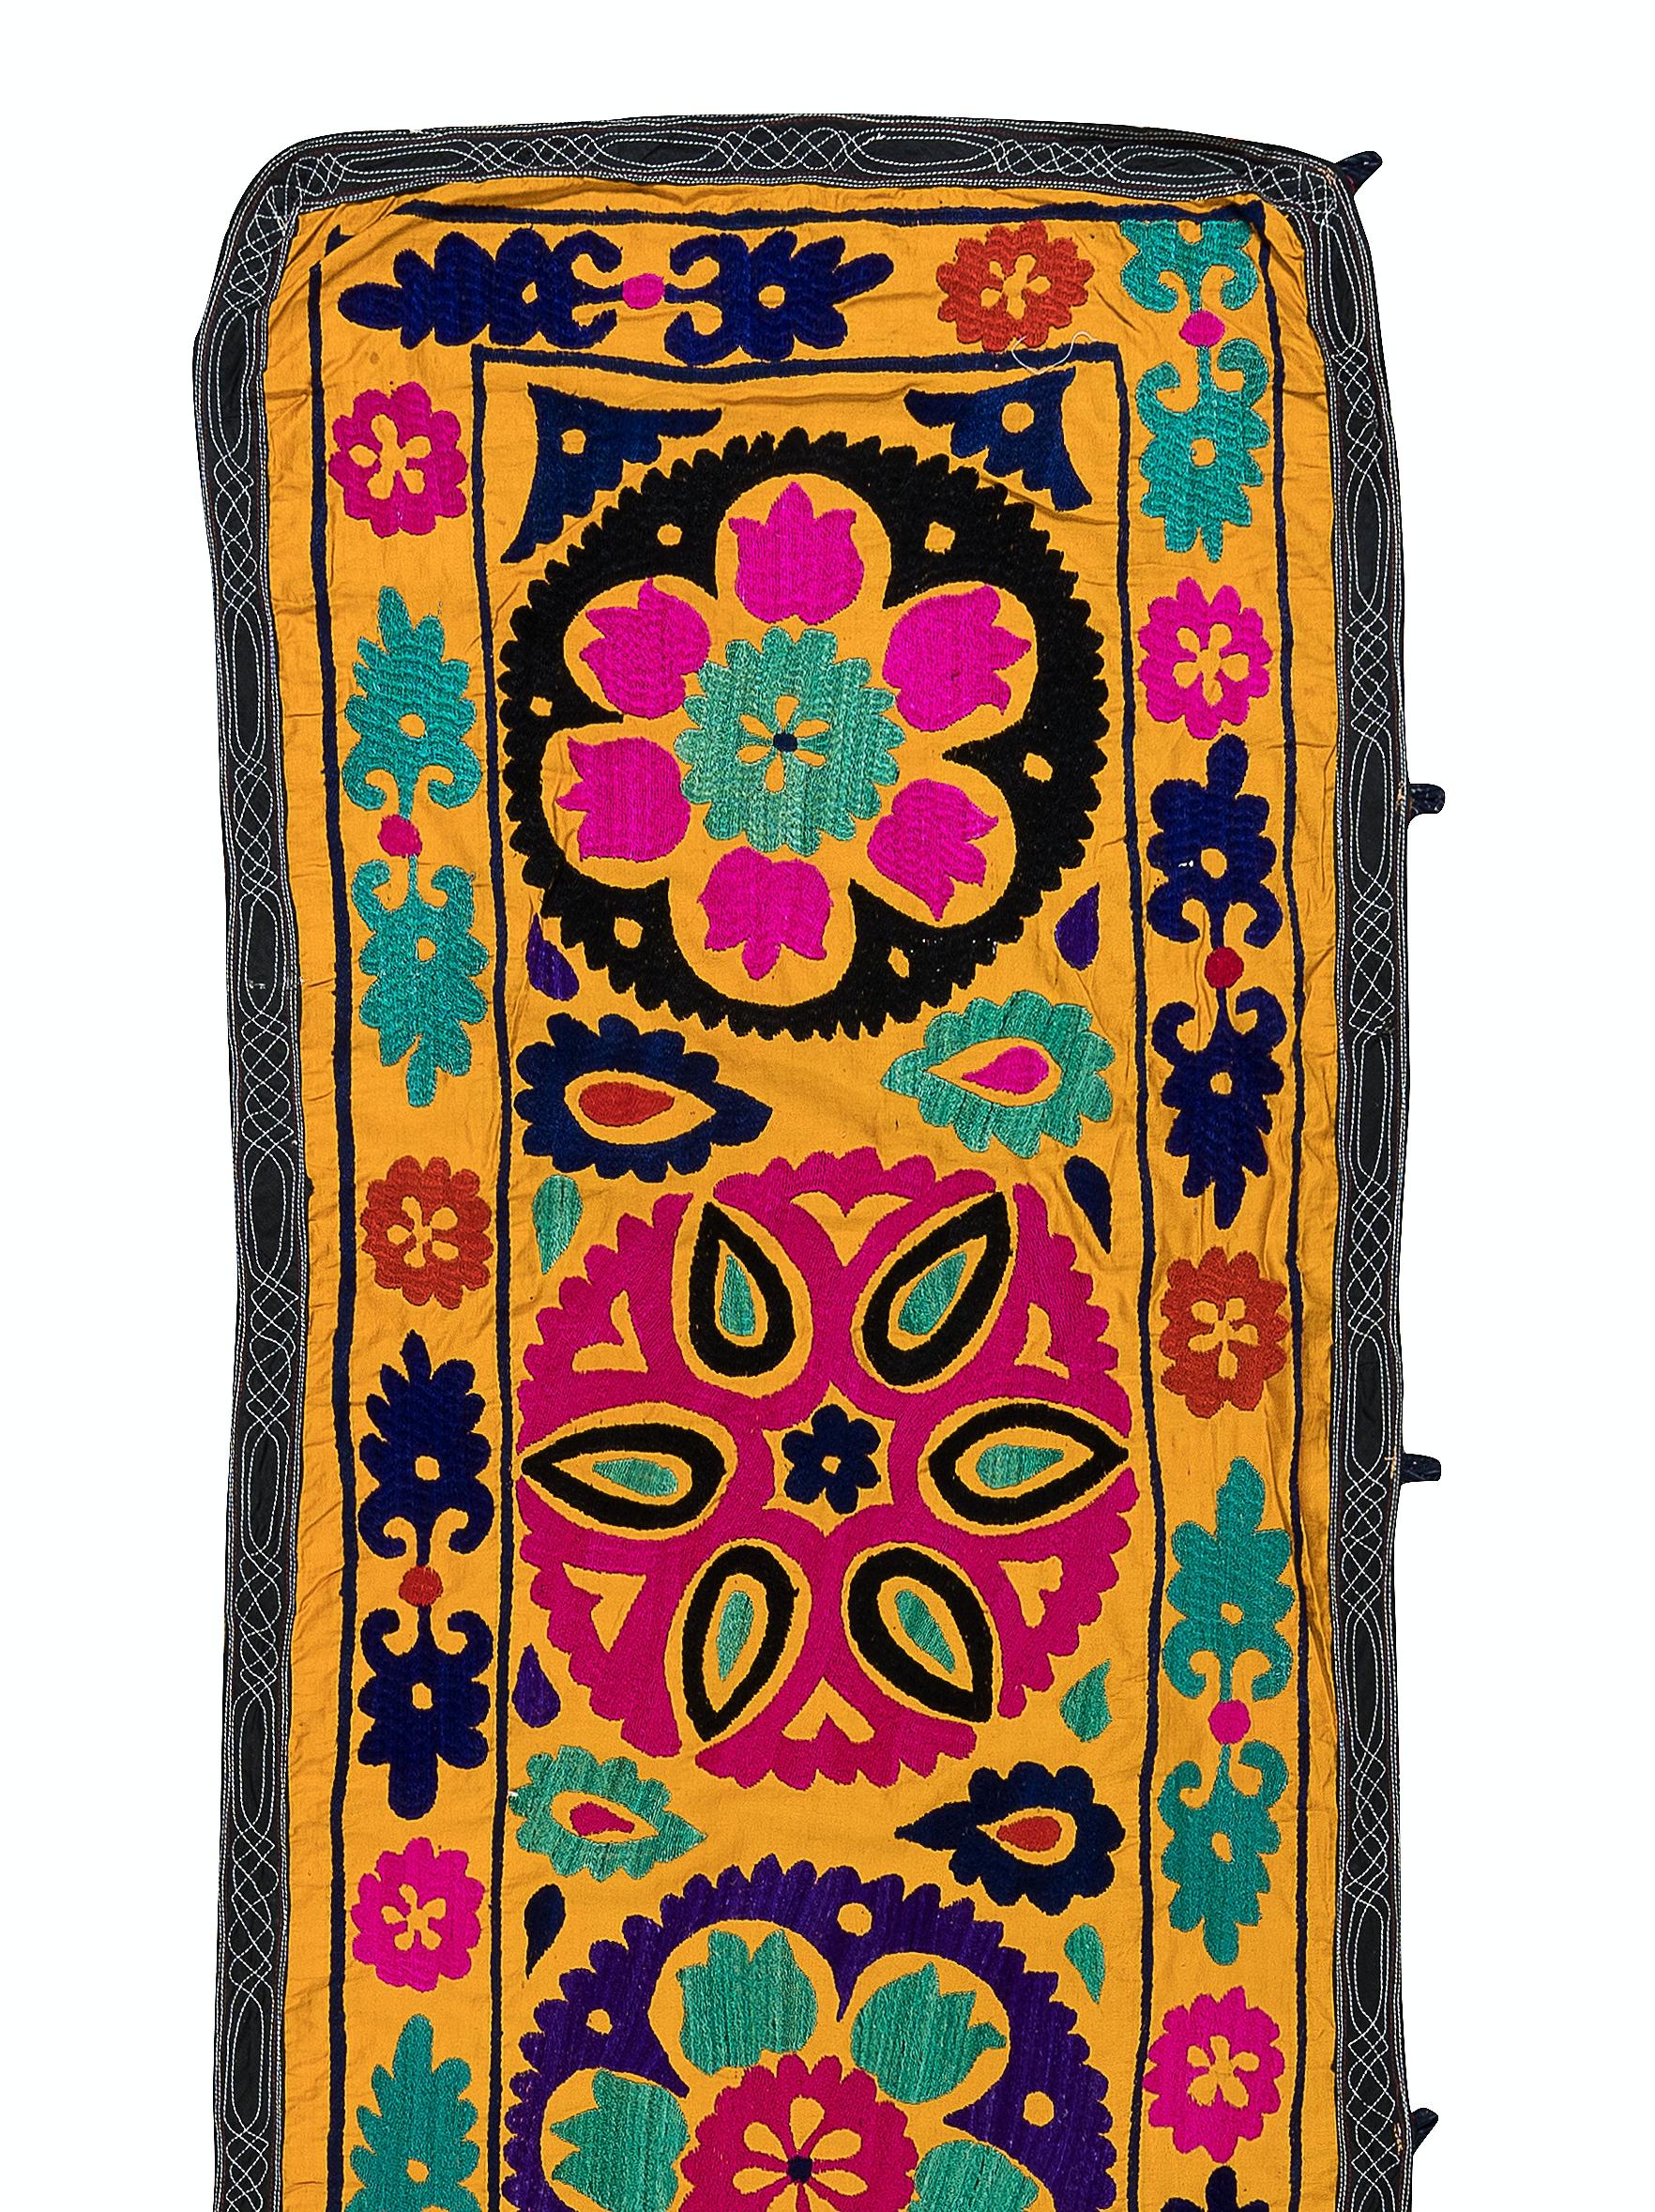 Uzbek 2x14.6 Ft Vintage Silk Hand Embroidery Wall Hanging. Yellow Suzani Table Runner For Sale